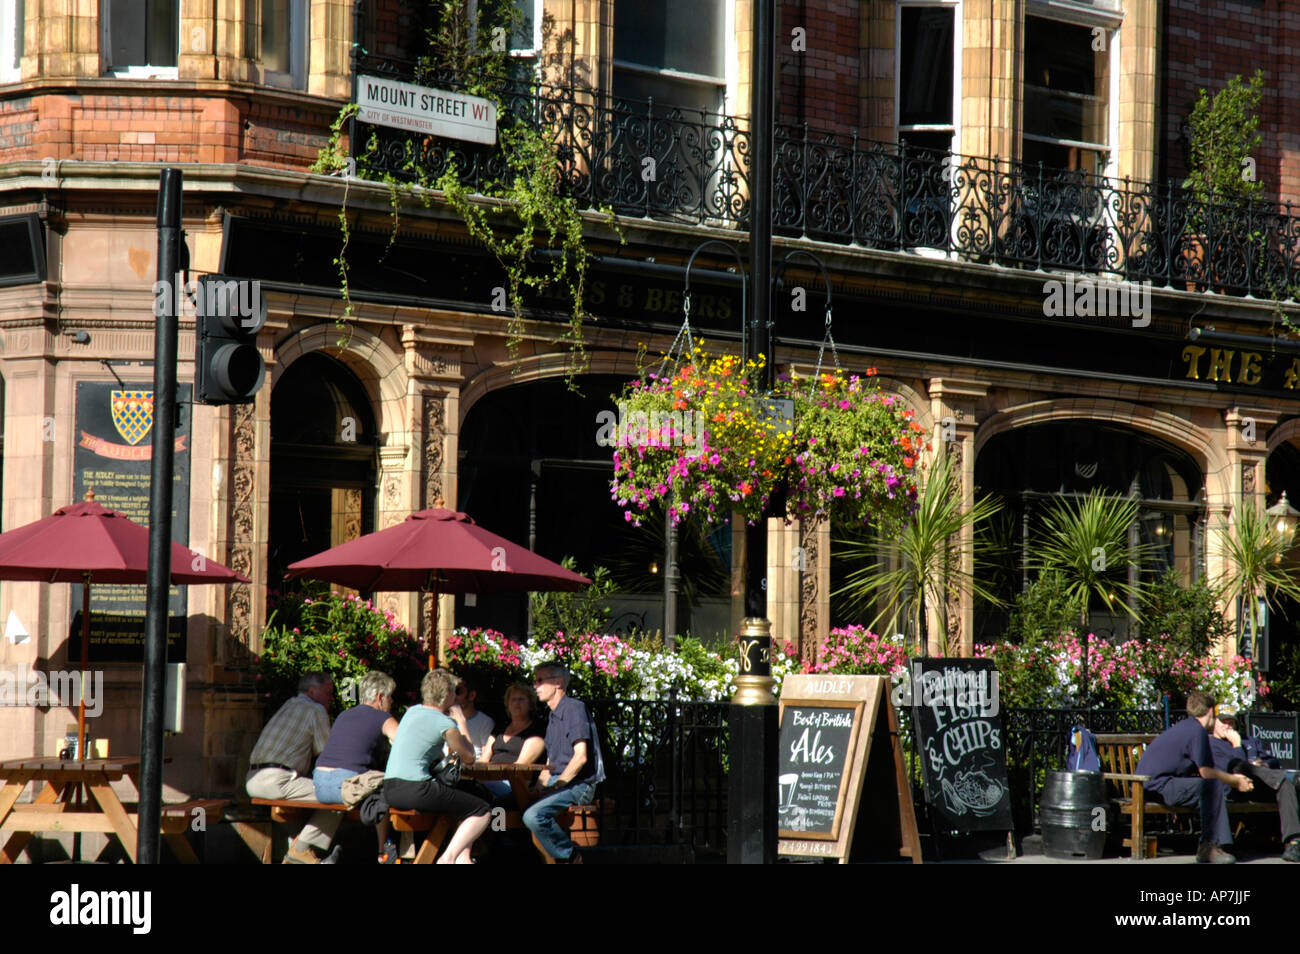 The Audley public house in Mount Street Mayfair London UK Stock Photo